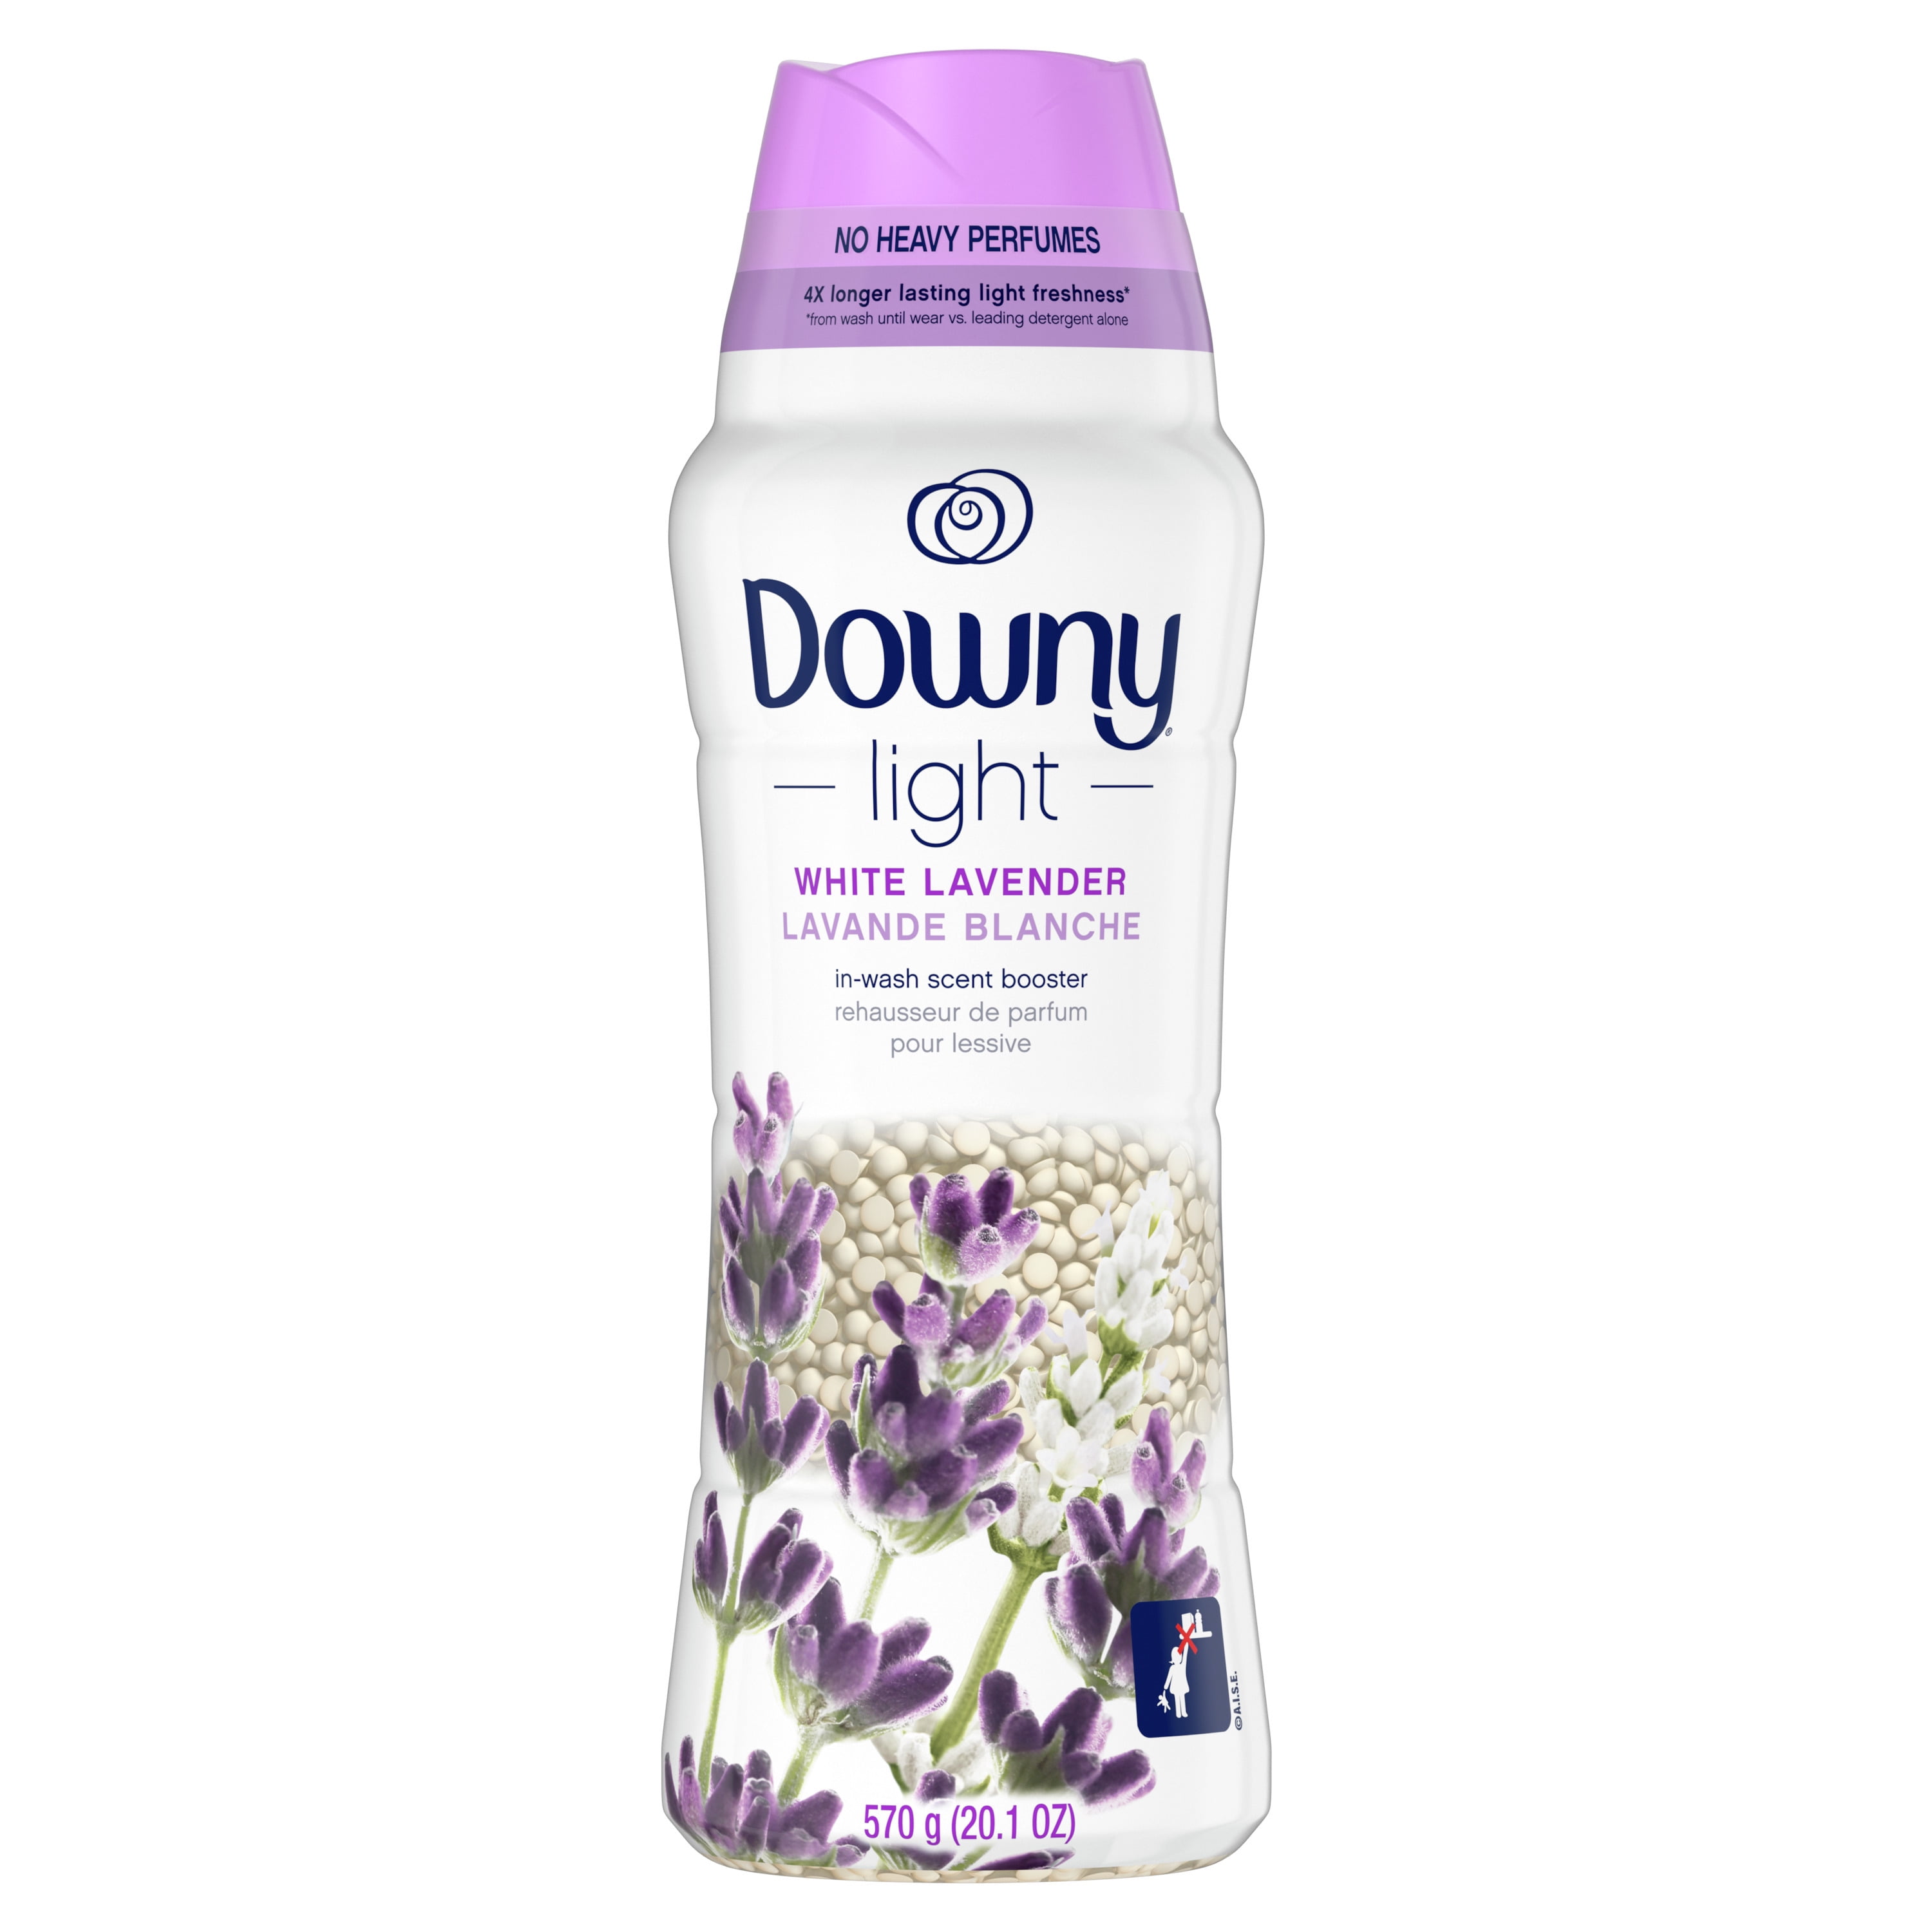 Downy Light Laundry Scent Booster Beads, White Lavender, 20.1 oz